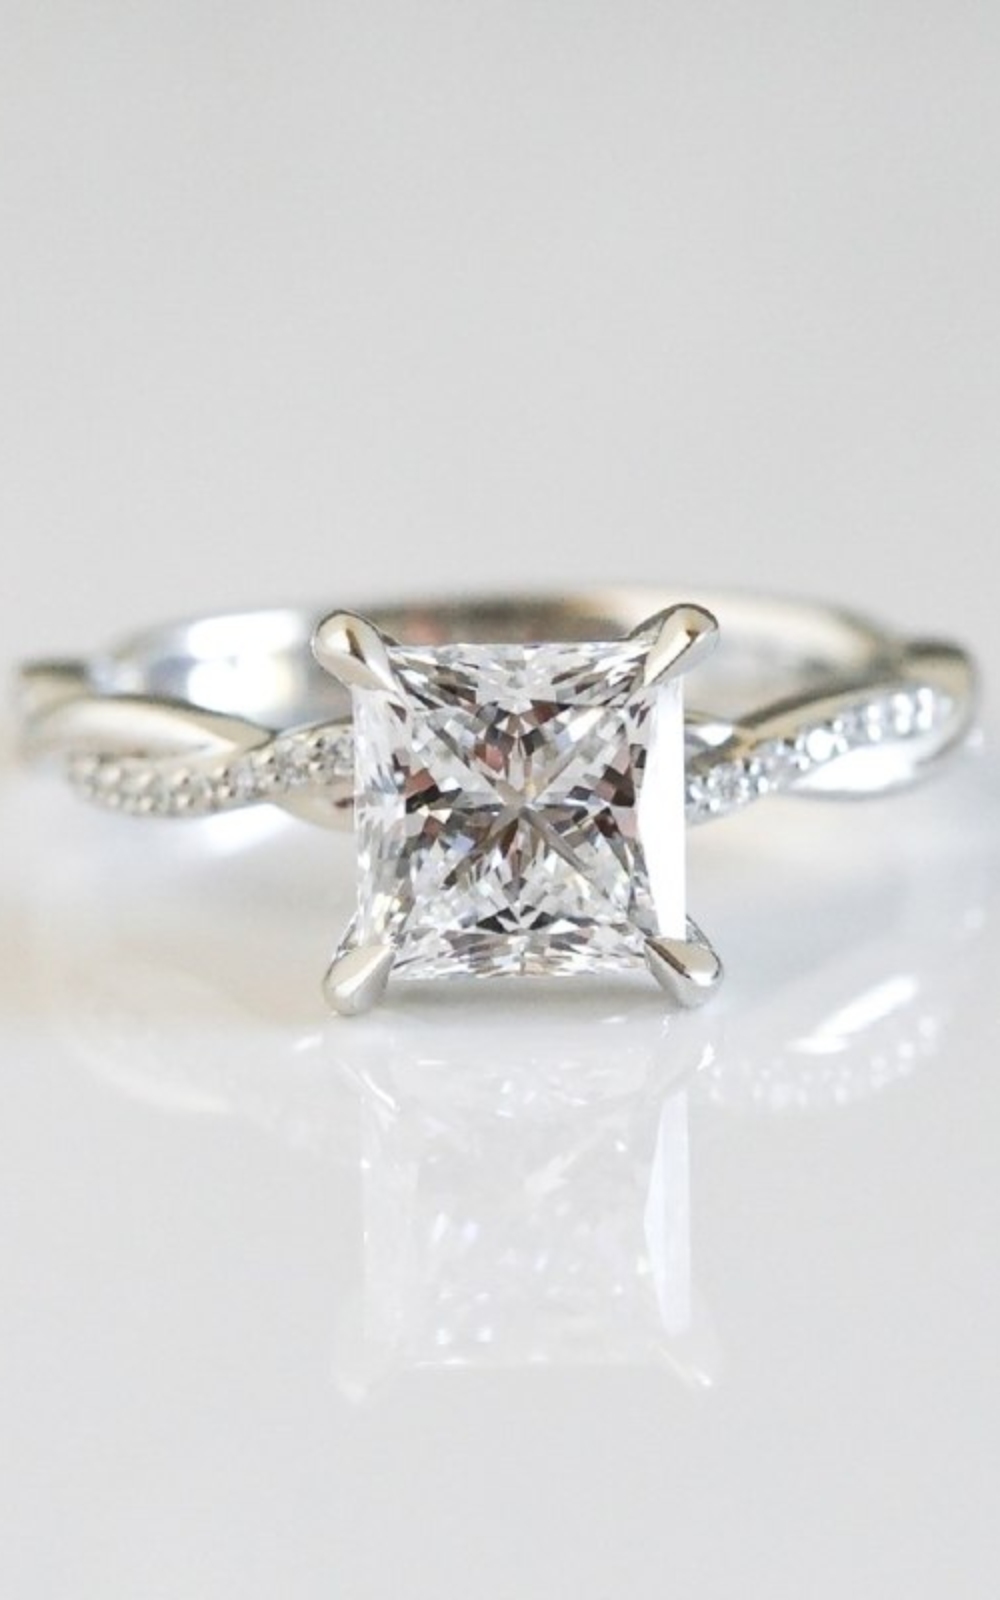 Princess Cut Engagement Rings Guide - Everything You Need to Know